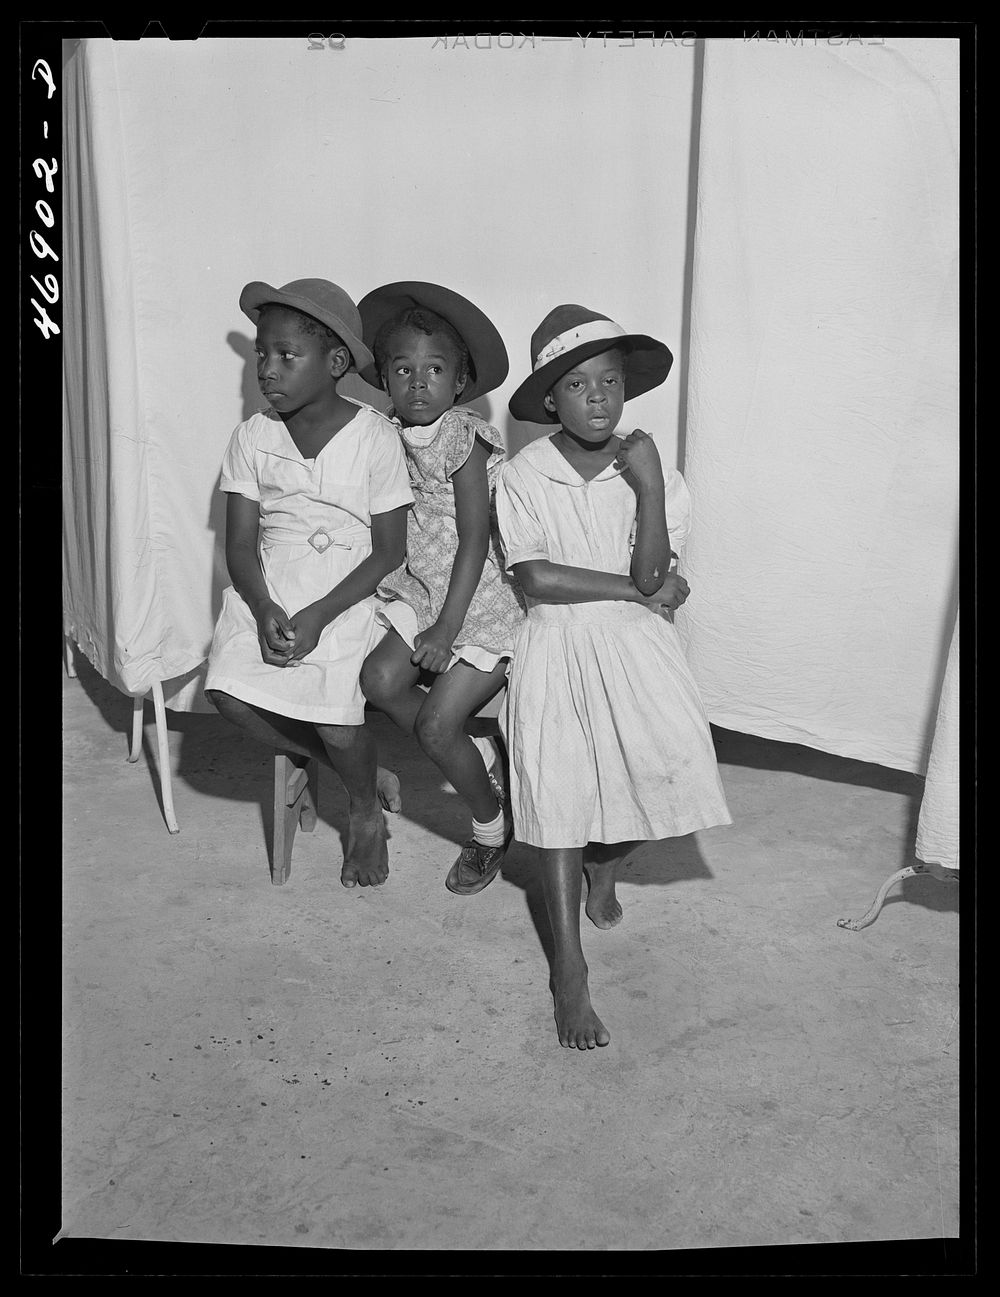 Frederiksted (vicinity), Saint Croix Island, Virgin Islands. At the health clinic. Sourced from the Library of Congress.